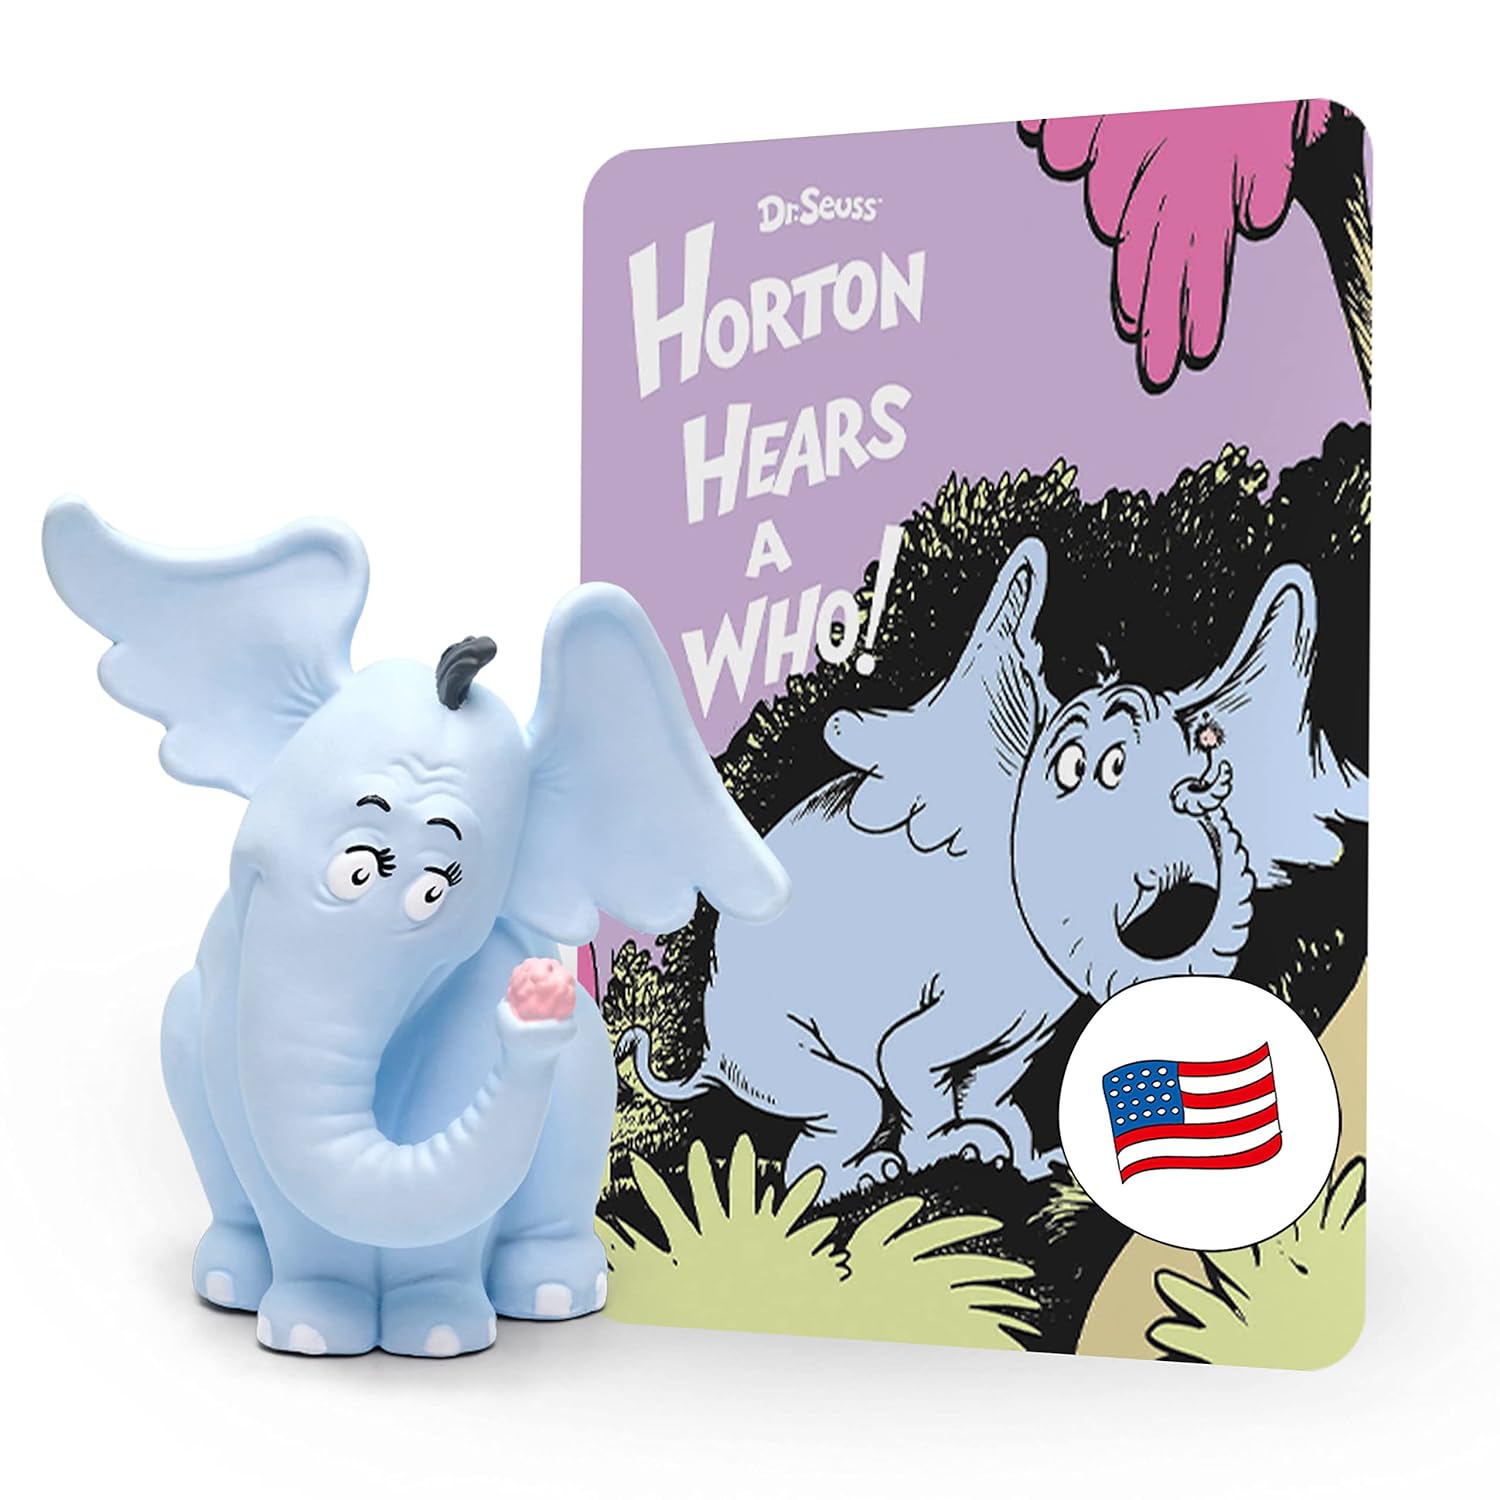 Great Choice Products Horton Audio Play Character From Horton Hears A Who! By Dr. Seuss